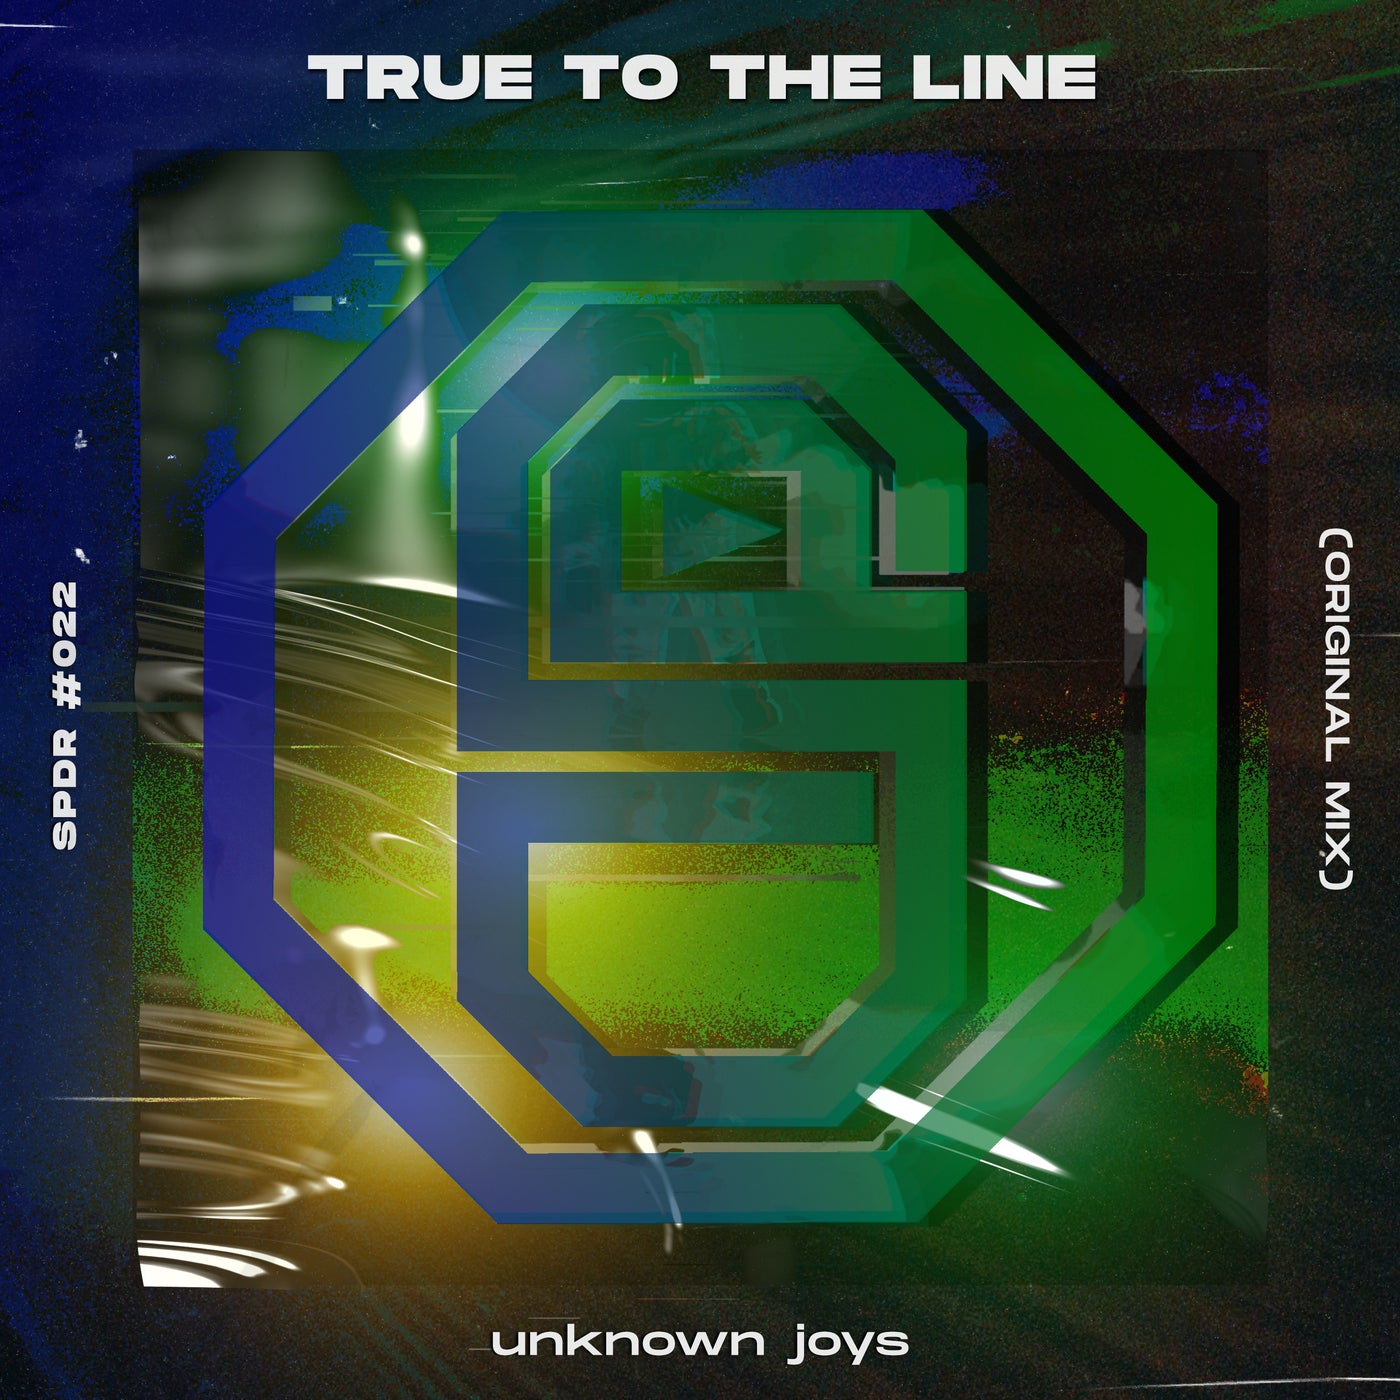 unknown joys – True to the Line [SPDR022]